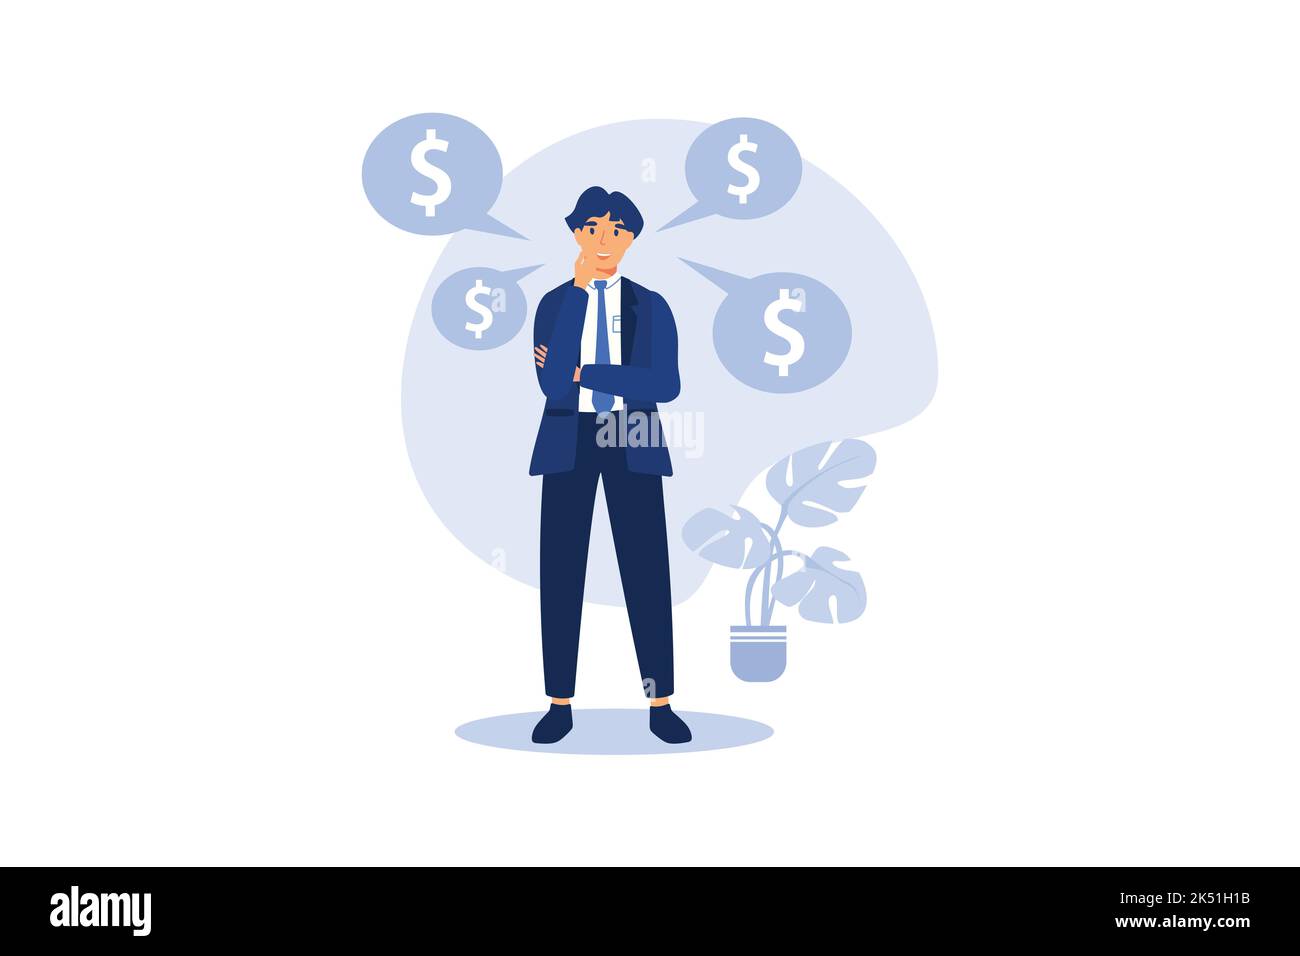 Successful businessman with cool style and lots of money. flat vector illustration Stock Vector